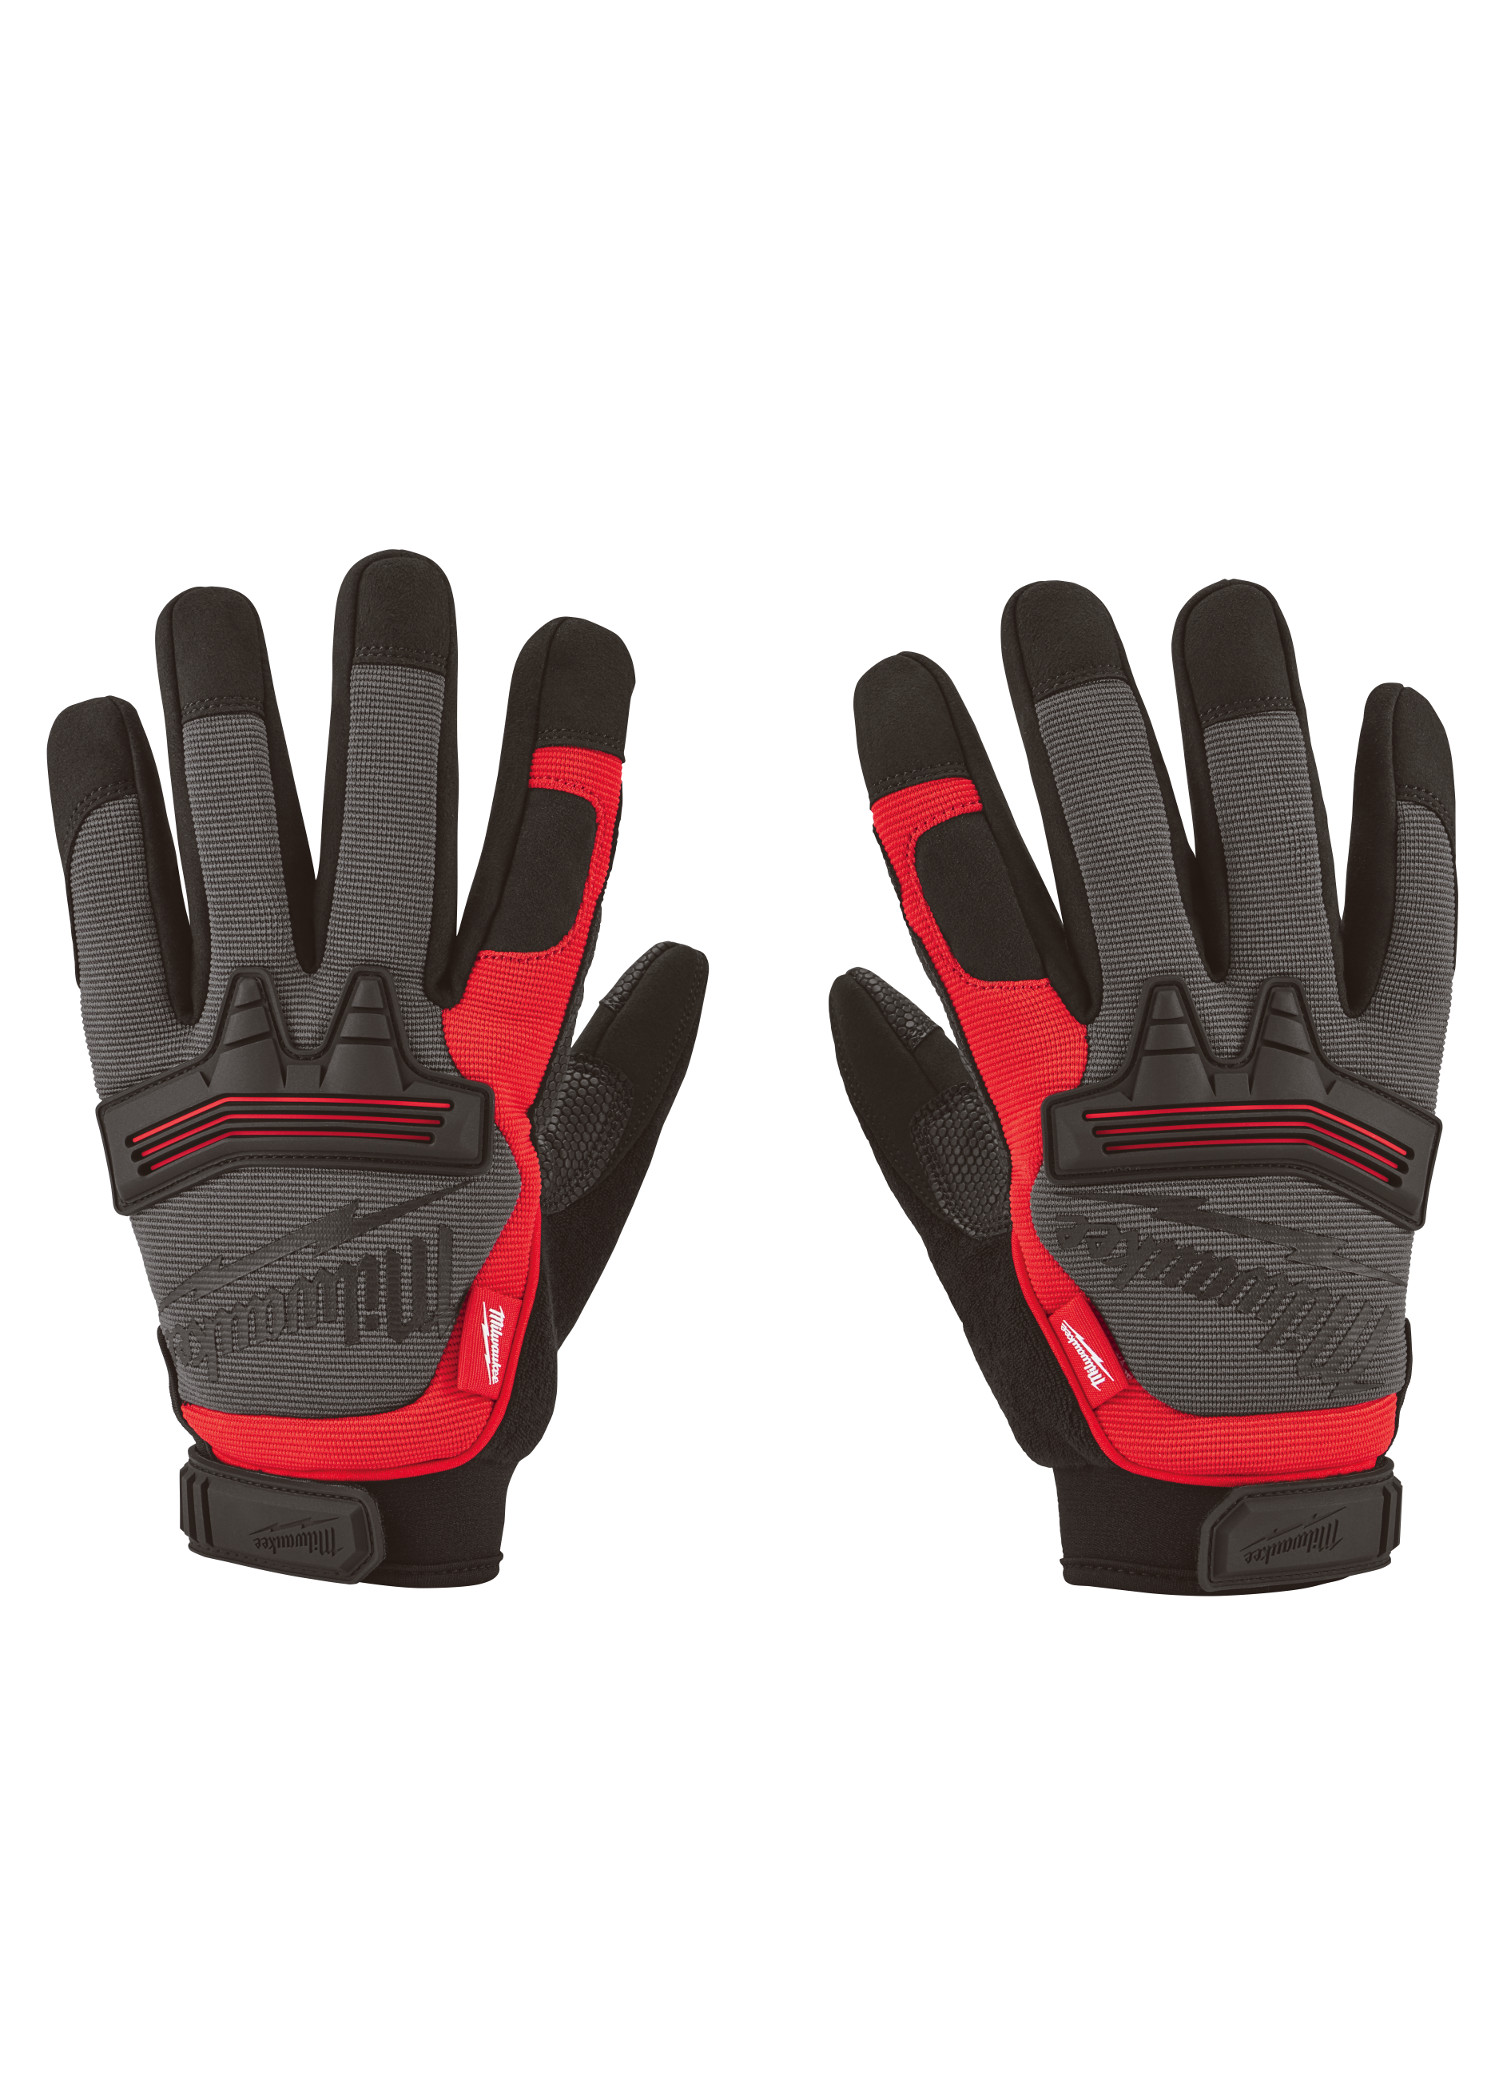 Milwaukee® 48-22-8732 General Purpose Work Gloves, Fingerless, Knuckle Guard Style, L, Leather Palm, Leather/Single Hem, Black/Red, Breathable Lining